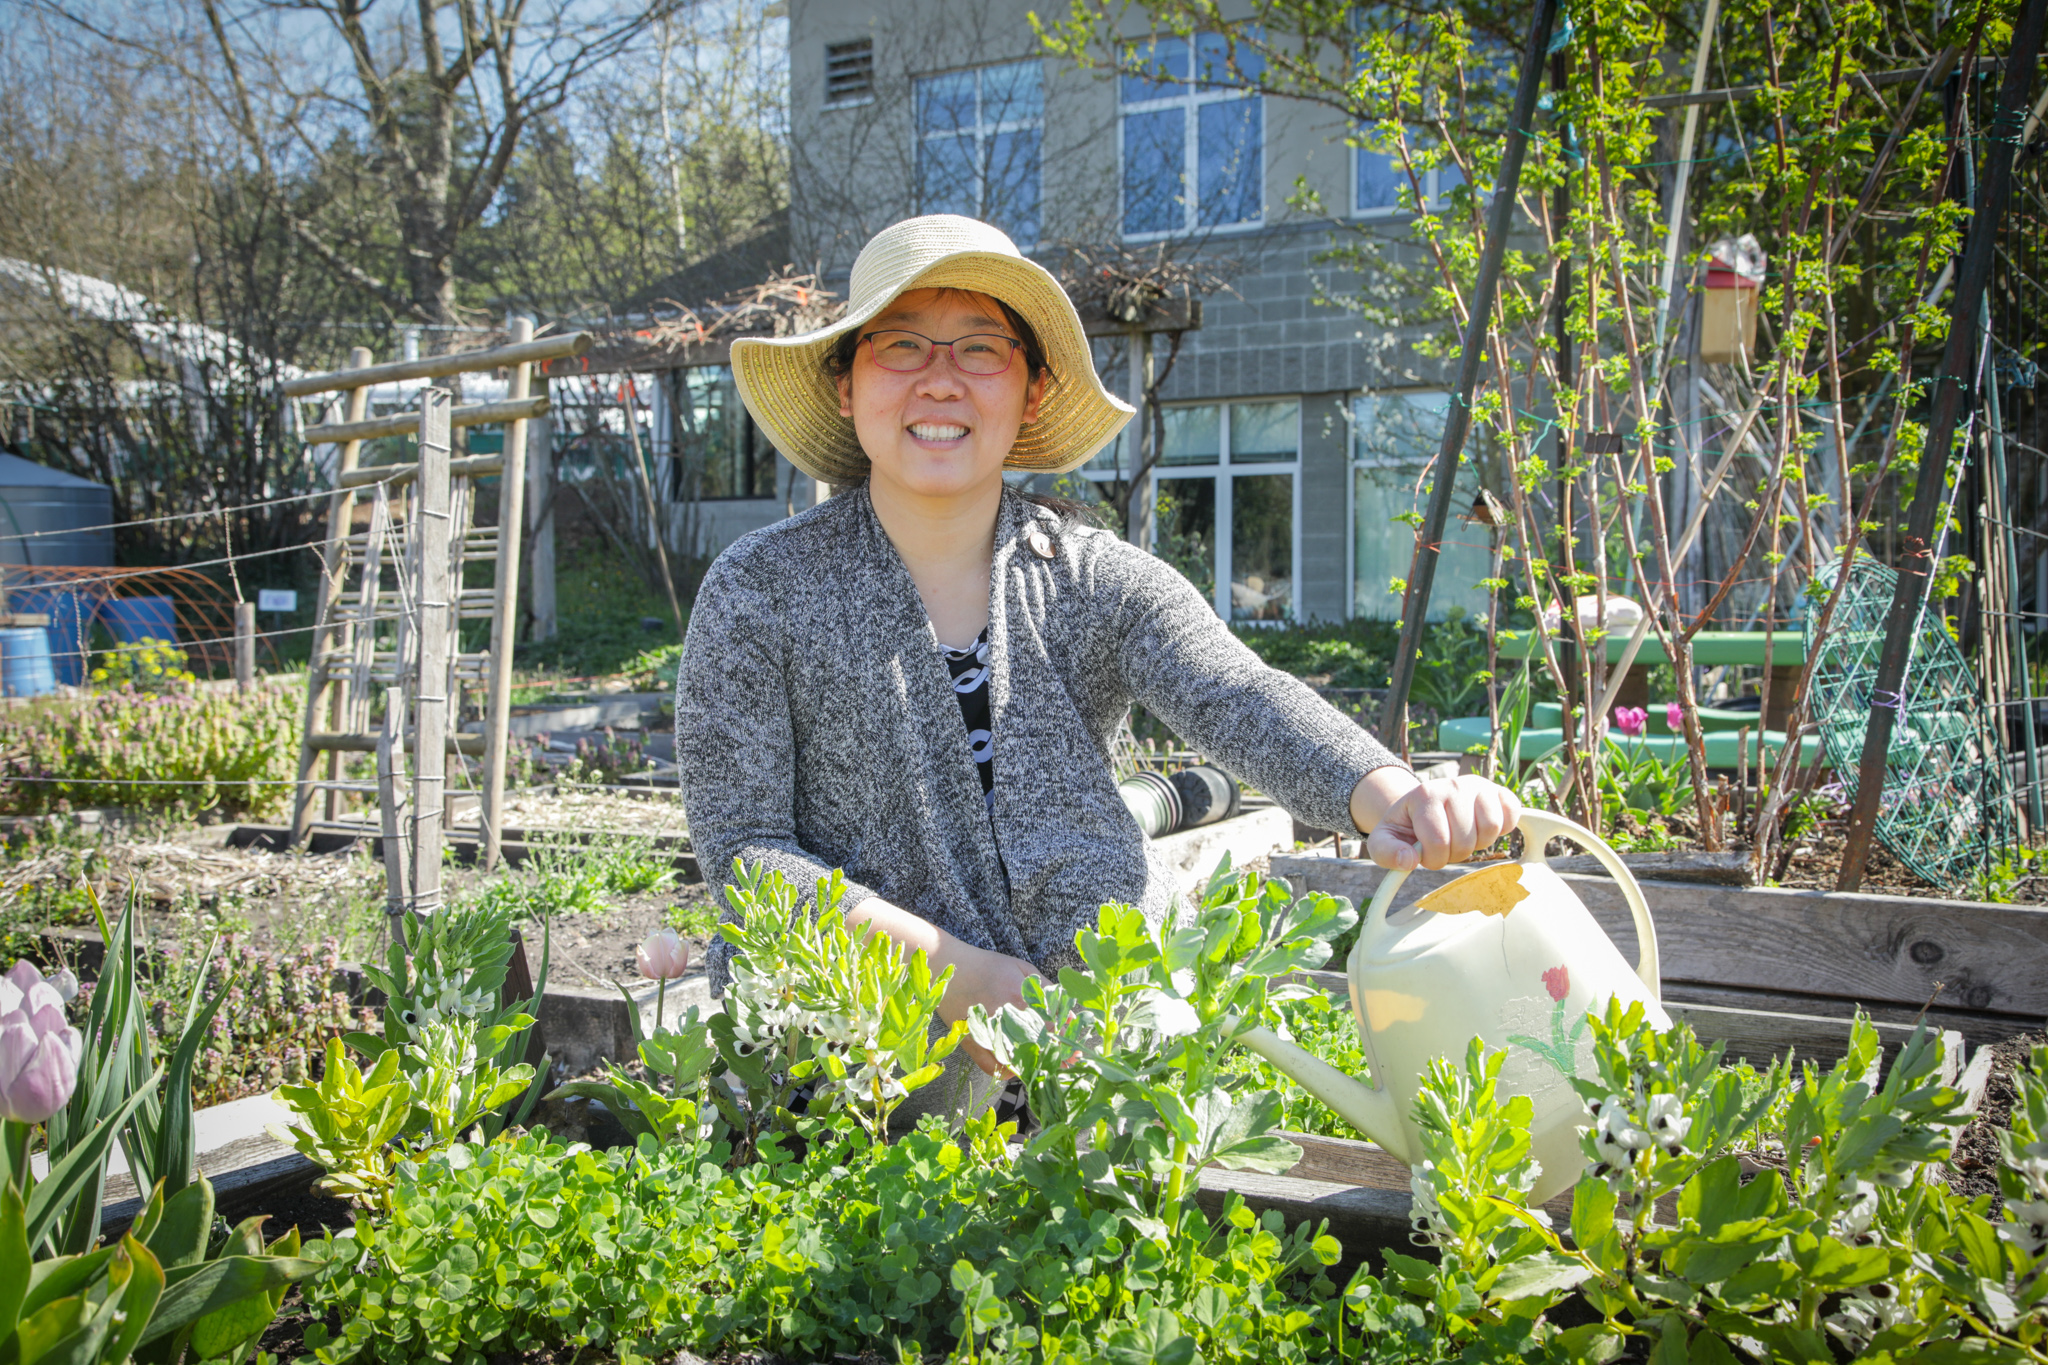 A community gardener waters her garden plot with a watering can.